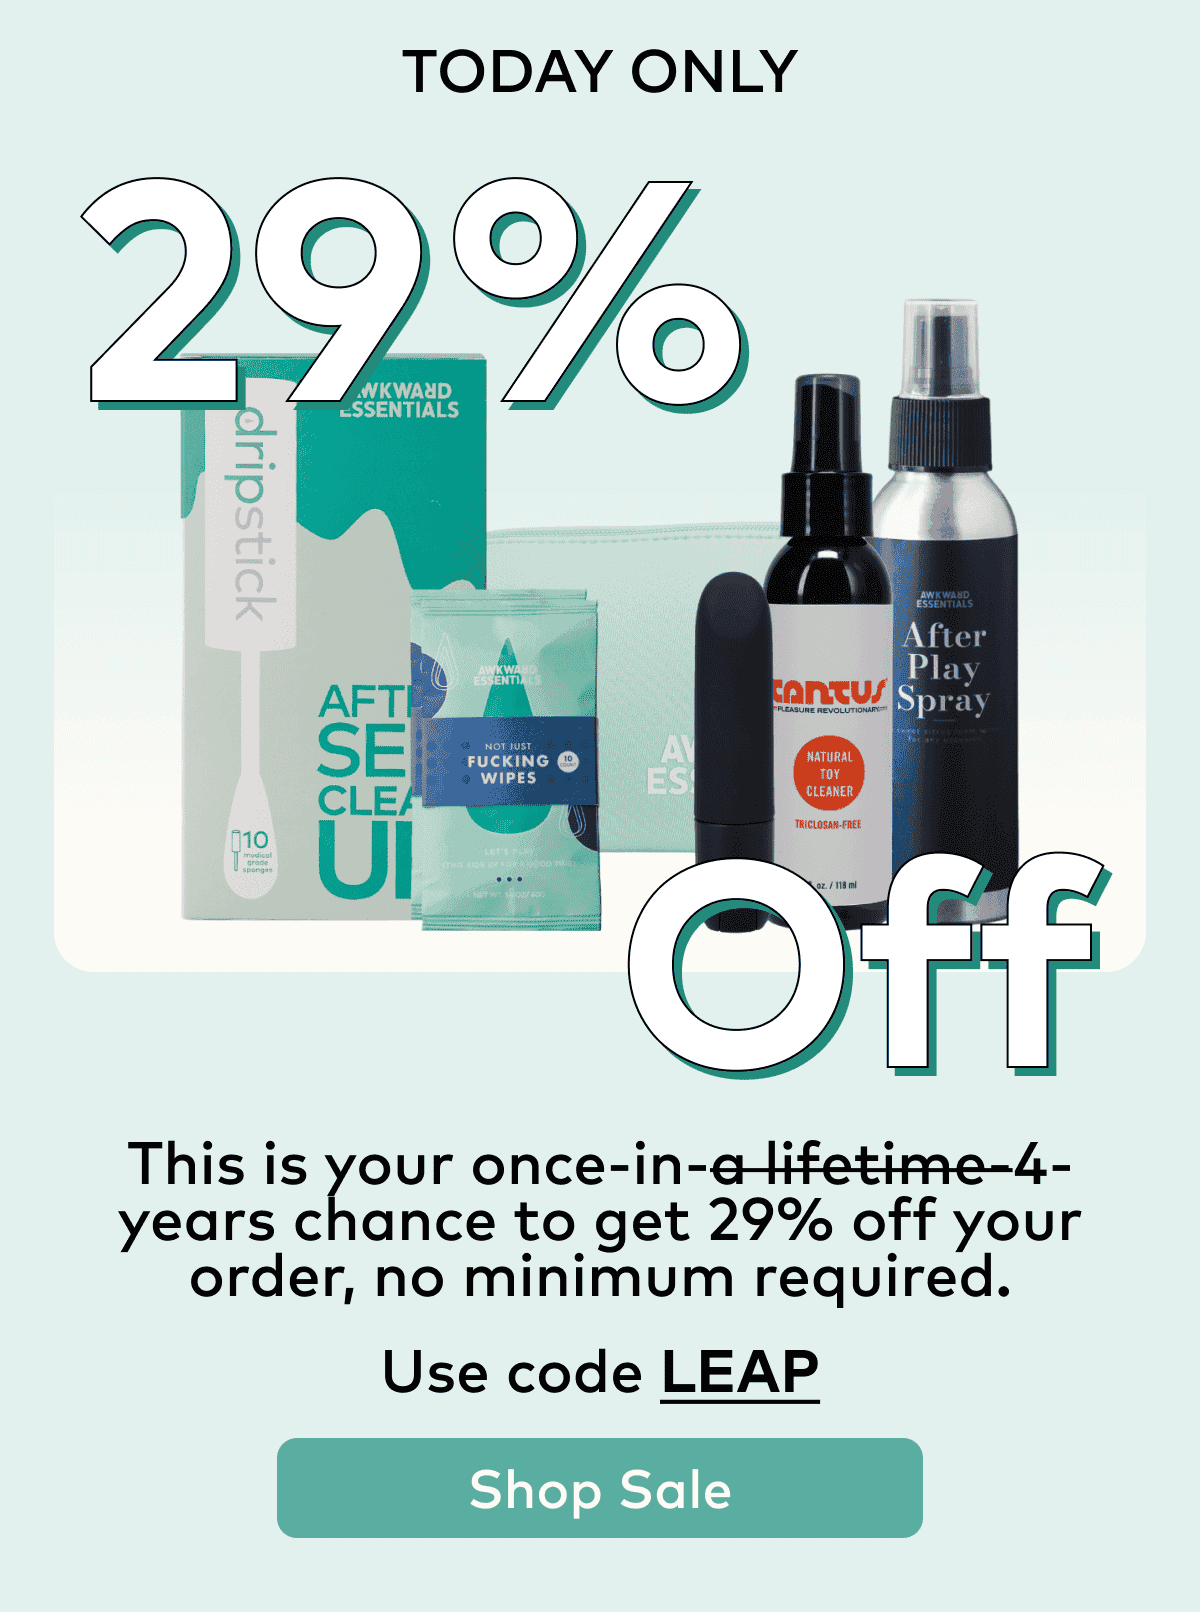 Save 29% off your order, no minimum required. Use code LEAP